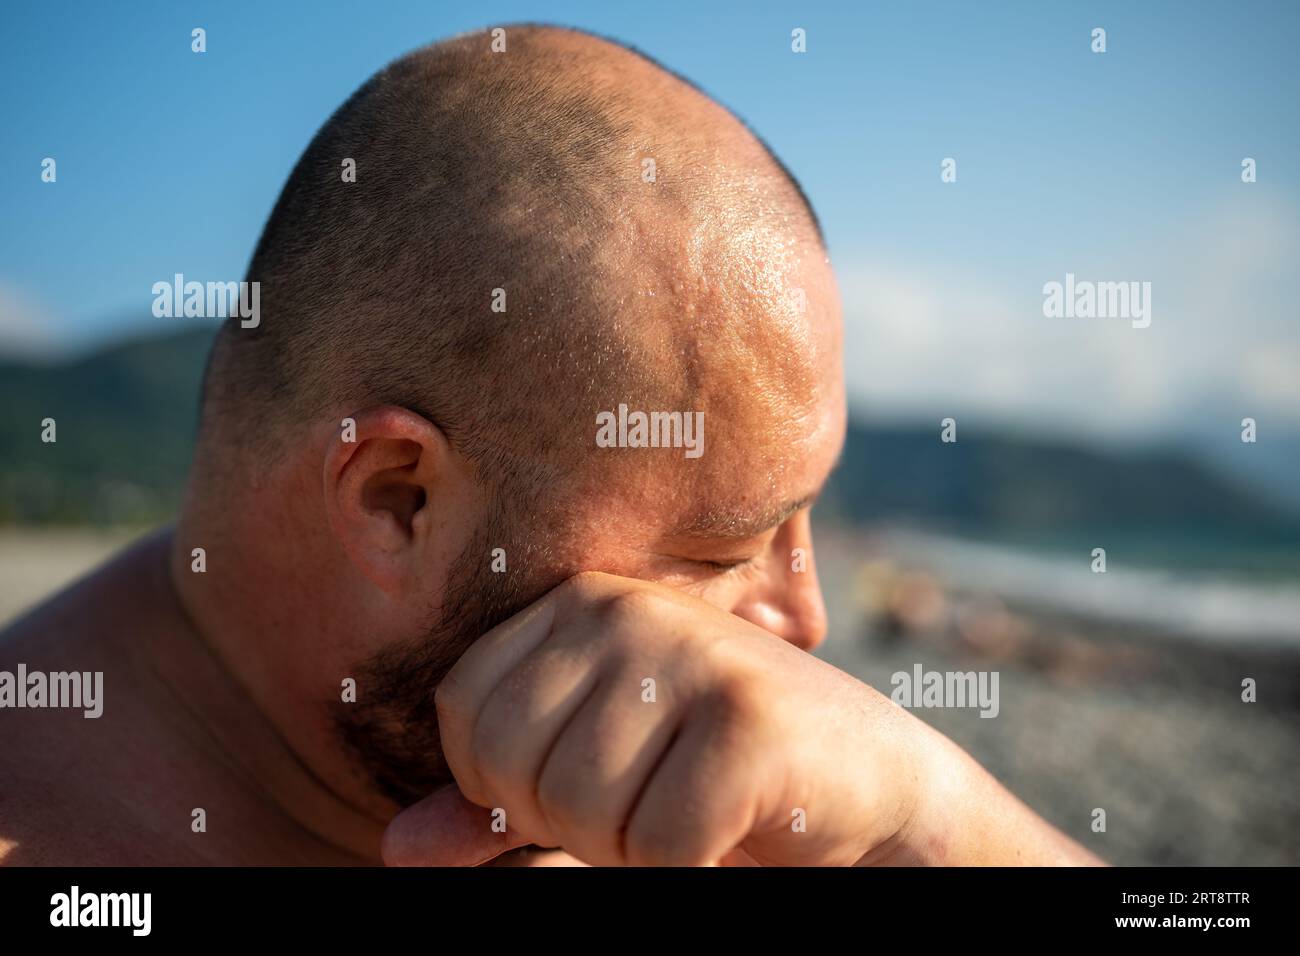 Overweight man rubbing sweat of face, forehead suffering from extra heat weather in summer. Stock Photo